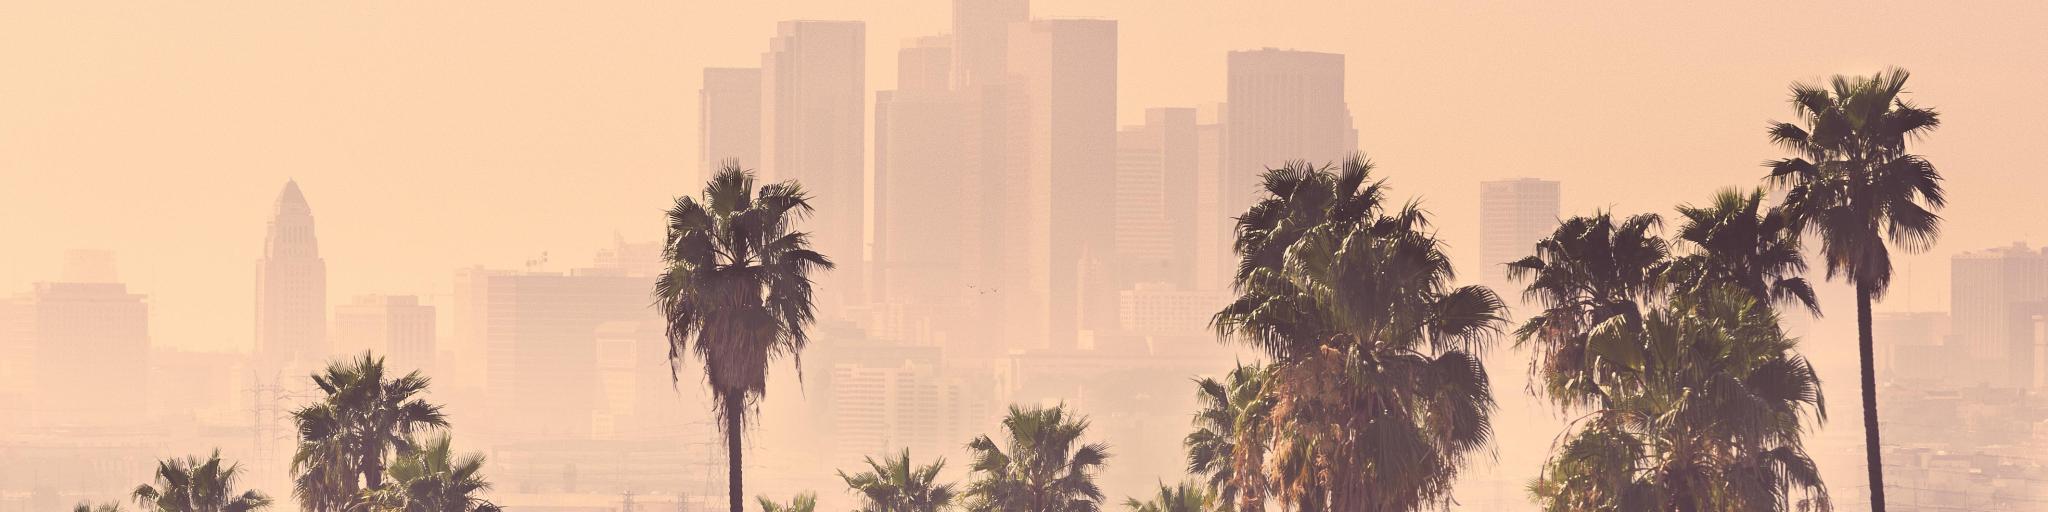 A misty, pastel-hued Los Angeles skyline with palm trees in the foreground and buildings in the background